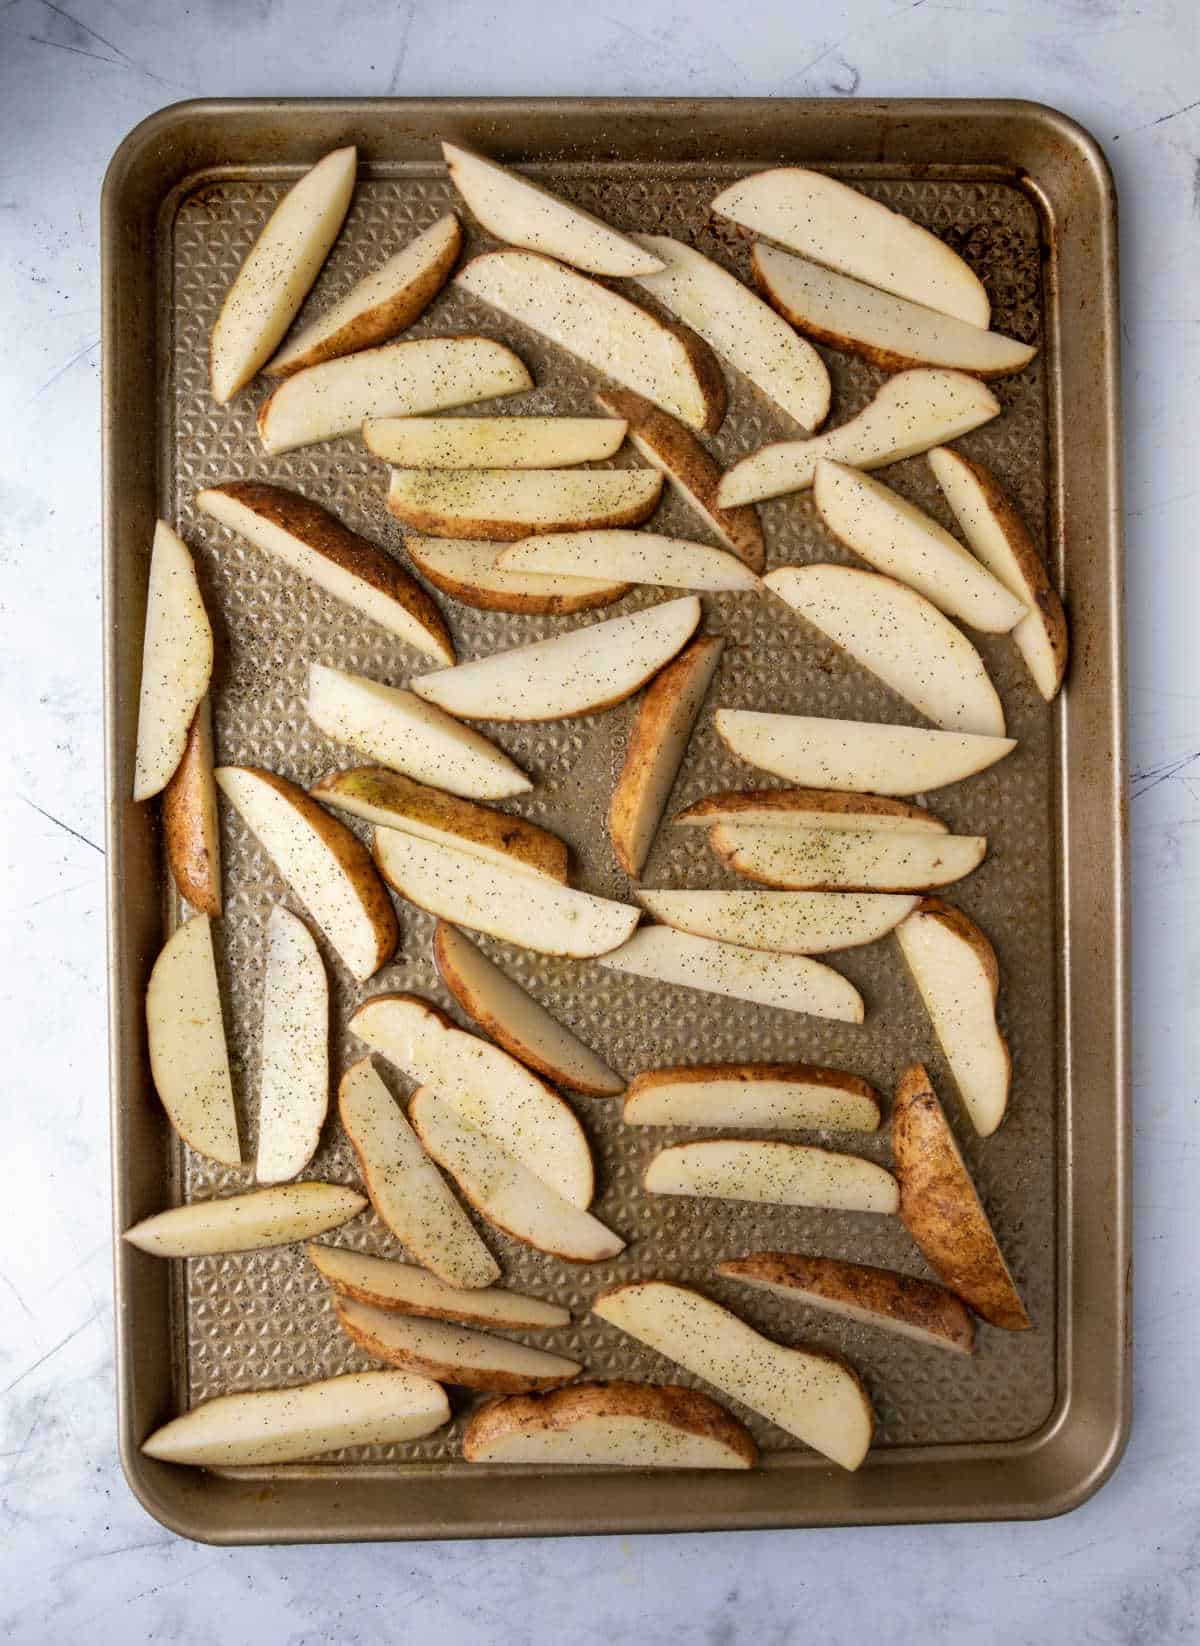 Unbaked potato wedges on a rimmed baking sheet. 